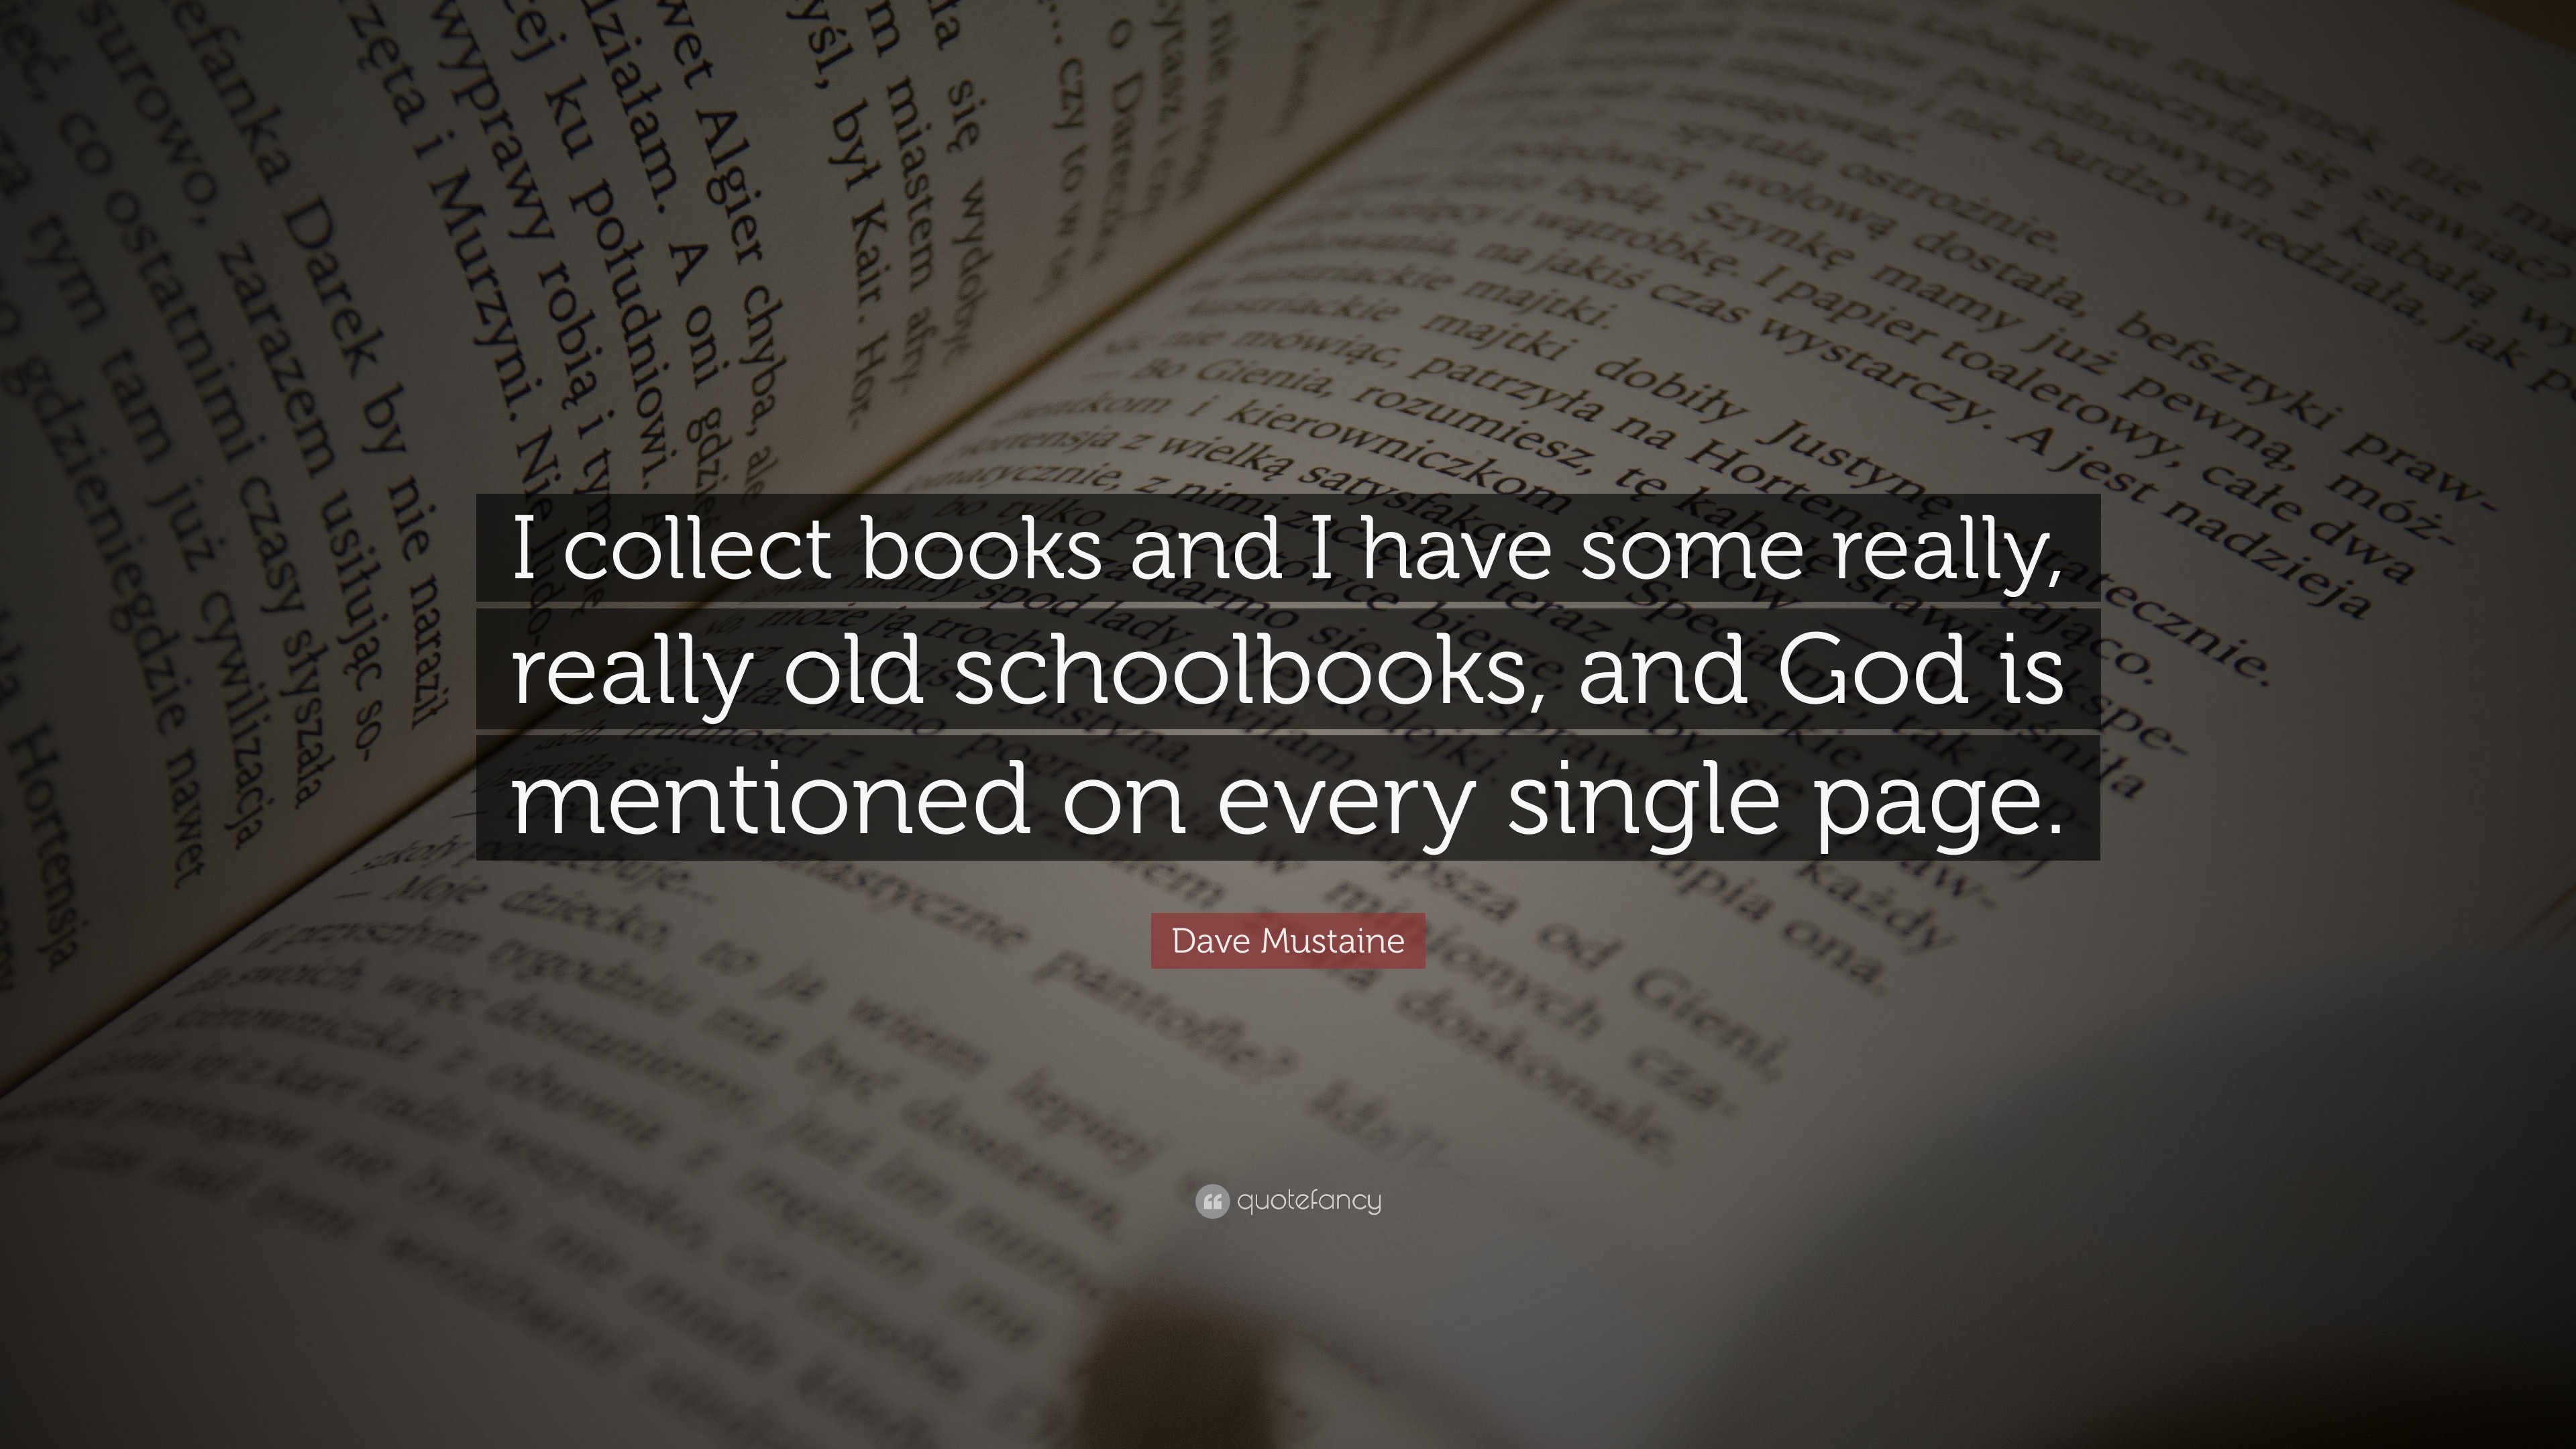 3840x2160 Dave Mustaine Quote: “I collect books and I have some really, really old